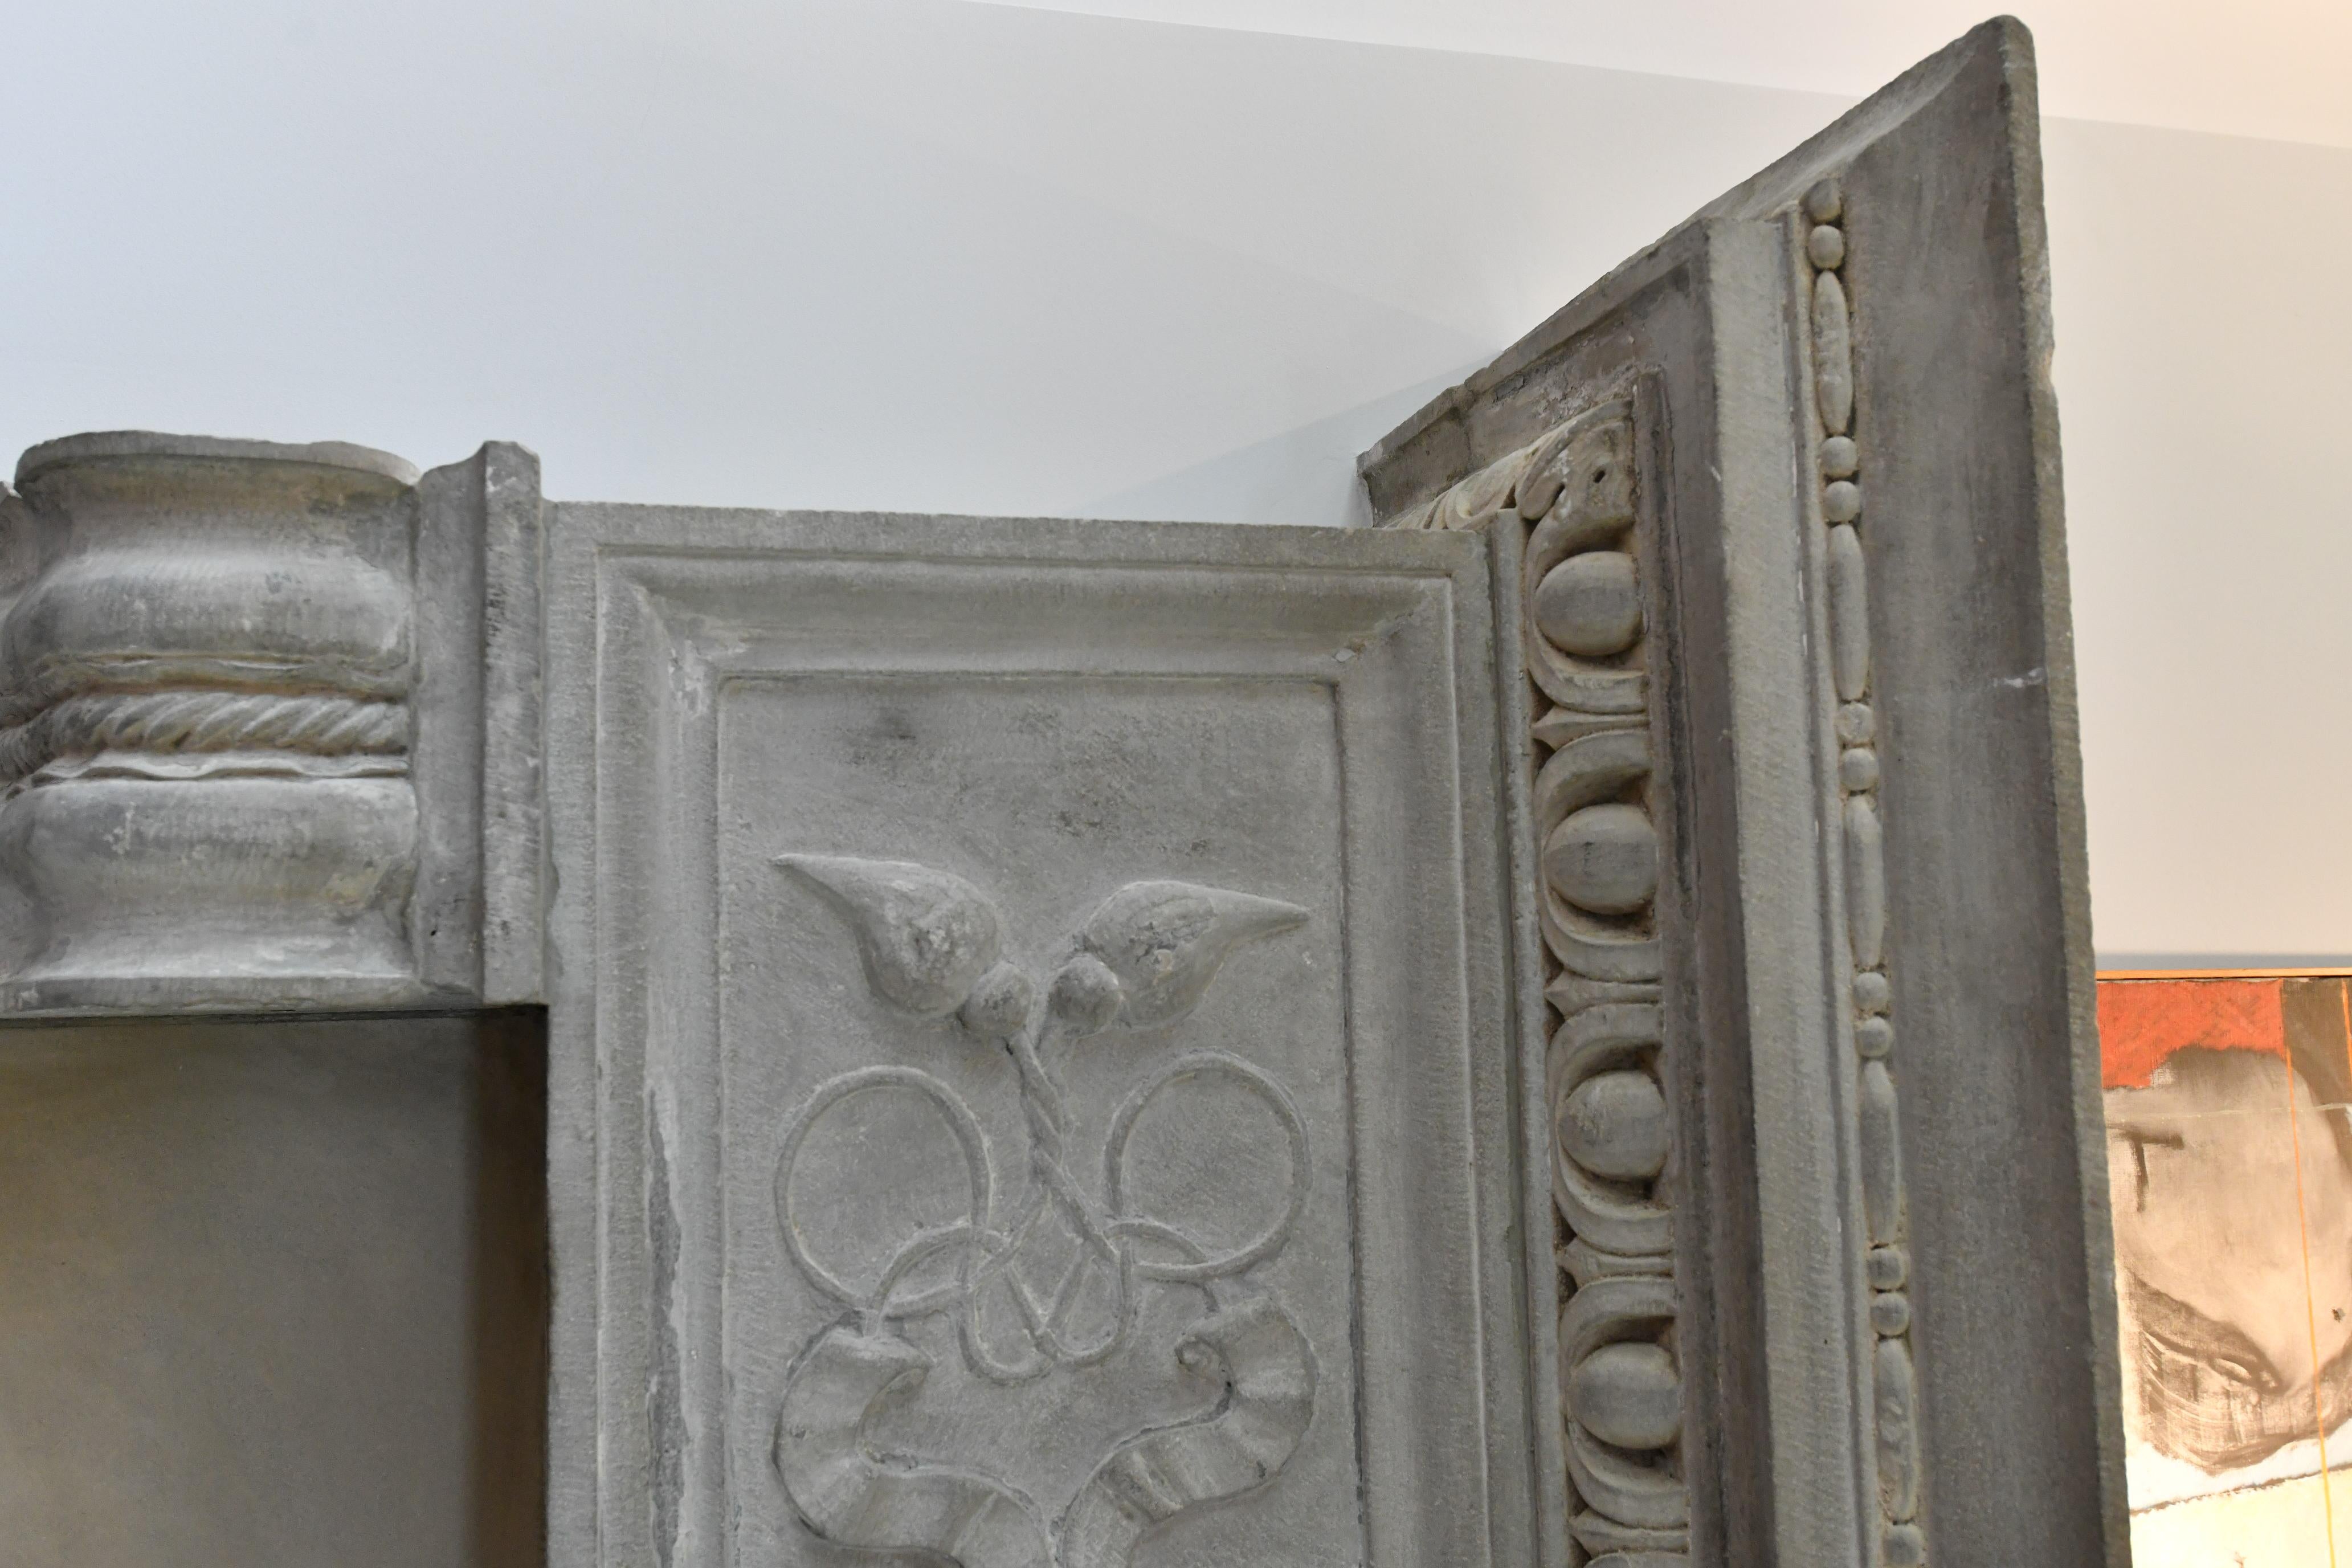 A handsome 19th century Italian chimneypiece in the Renaissance style. Carved in Limestone the chimneypiece displays imposing proportions, standing at over seven feet tall. Pilasters with fielded panels terminate in corbels decorated with rope twist